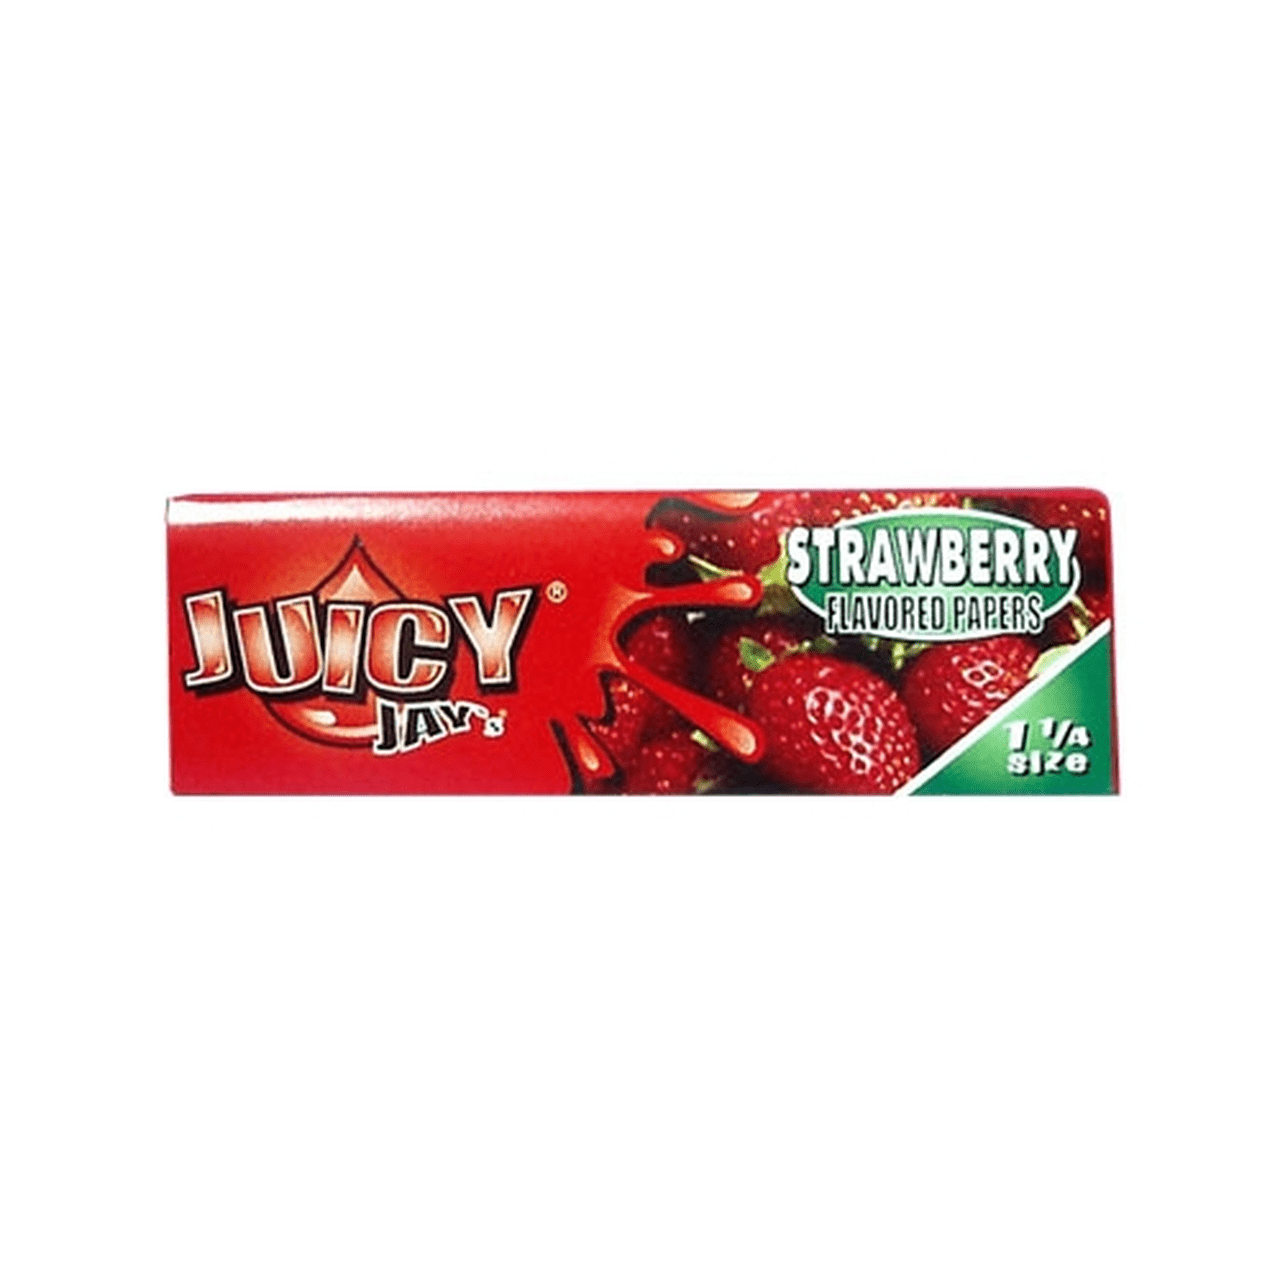 Juicy Jay Alternatives Strawberry Juicy Jay's 1 1/4 Flavored Rolling Papers